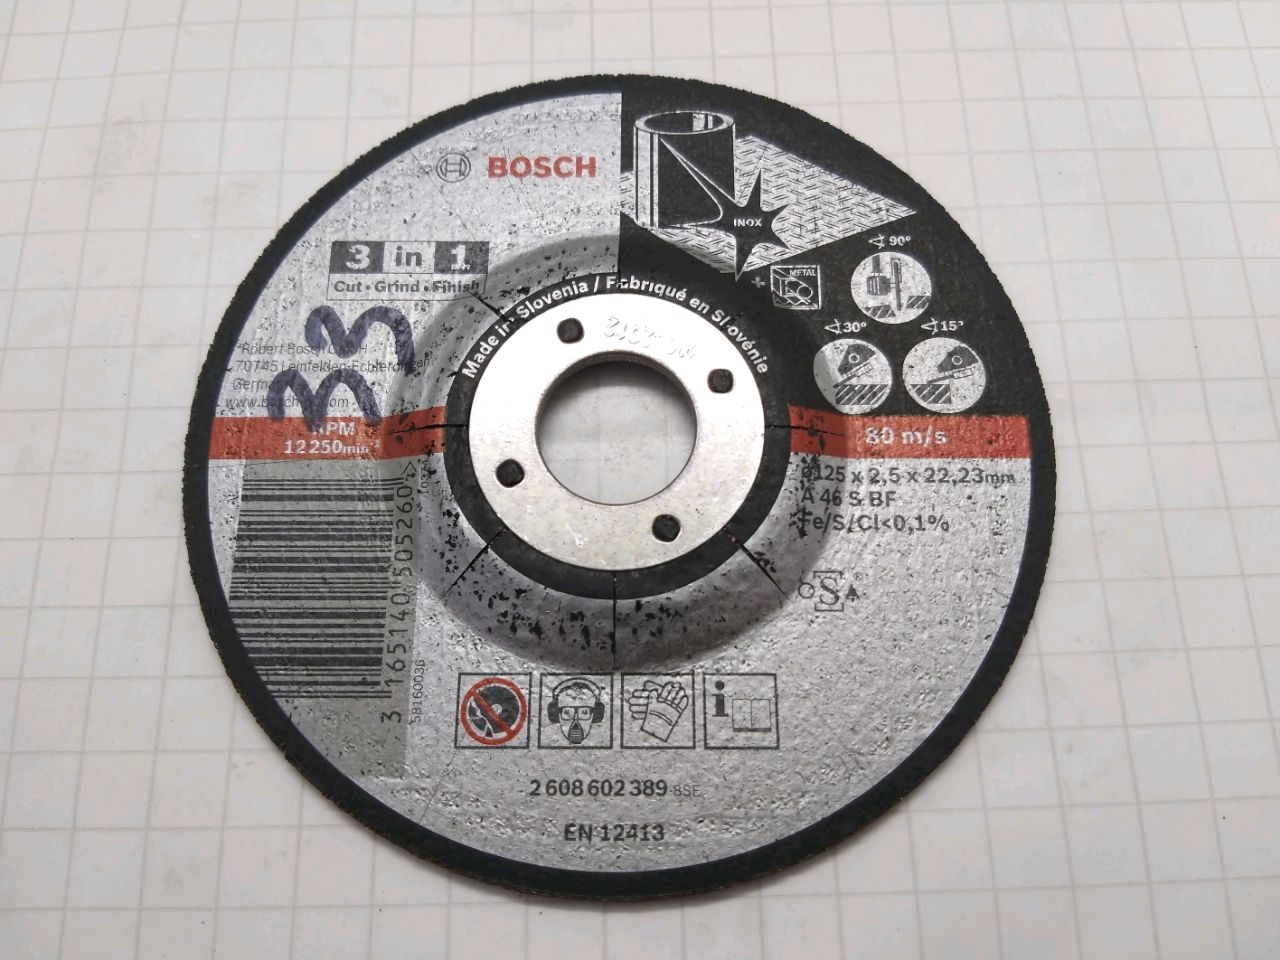 DISC 3 IN 1, 125 mm